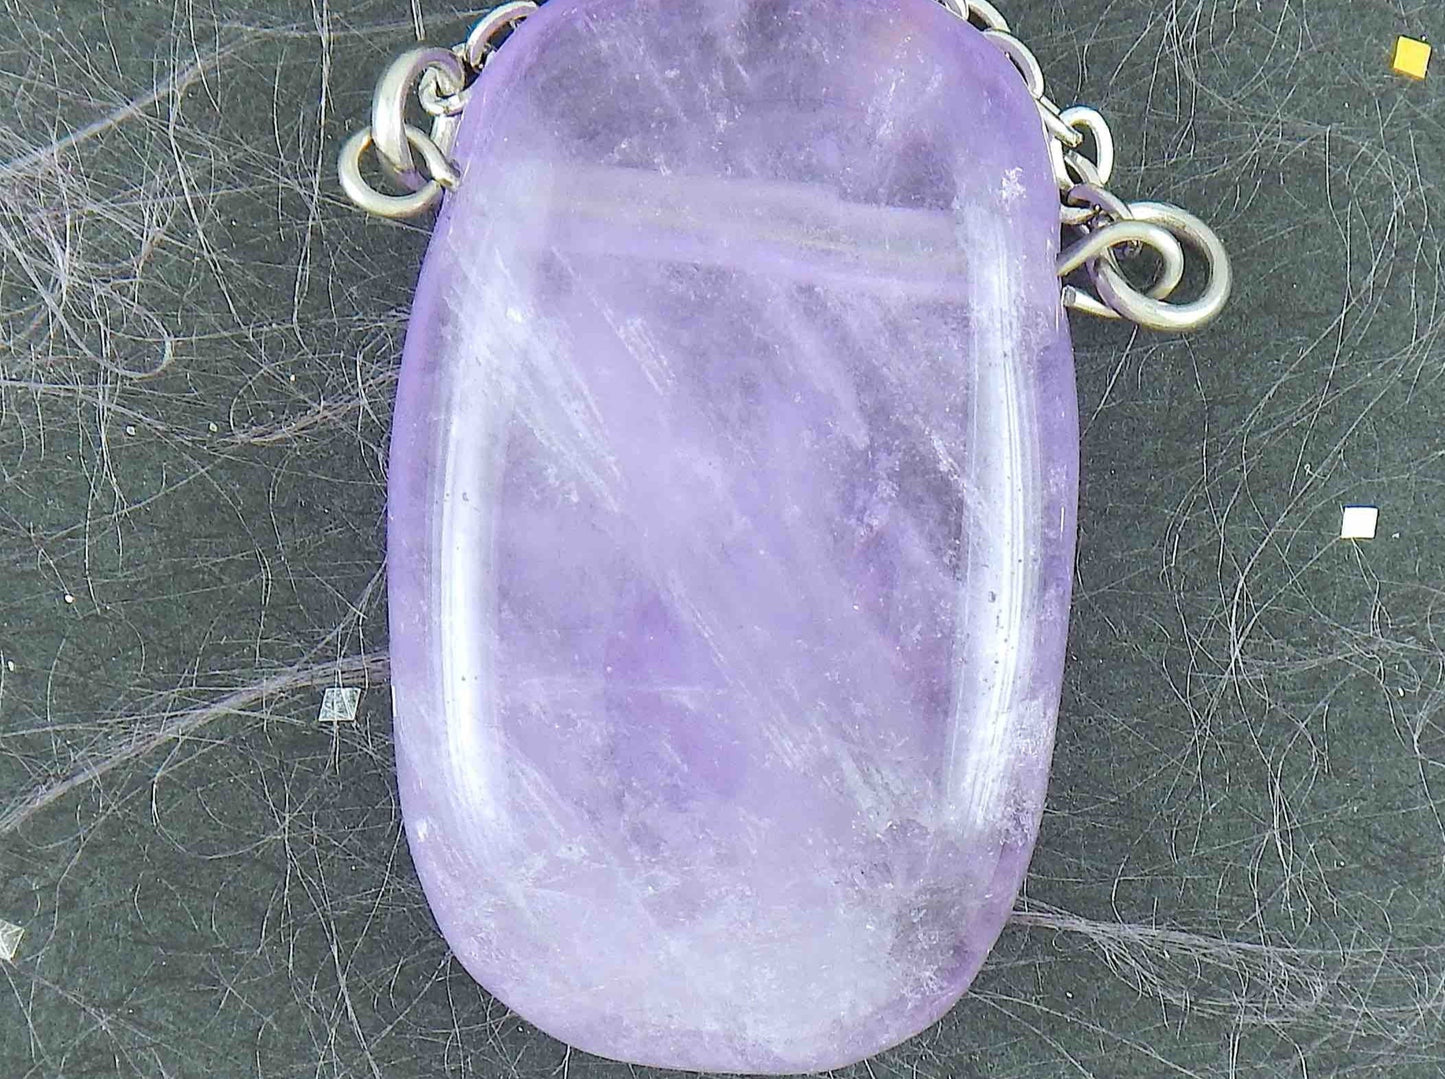 26-inch necklace with rectangular smoky light violet amethyst stone pendant, stainless steel chain